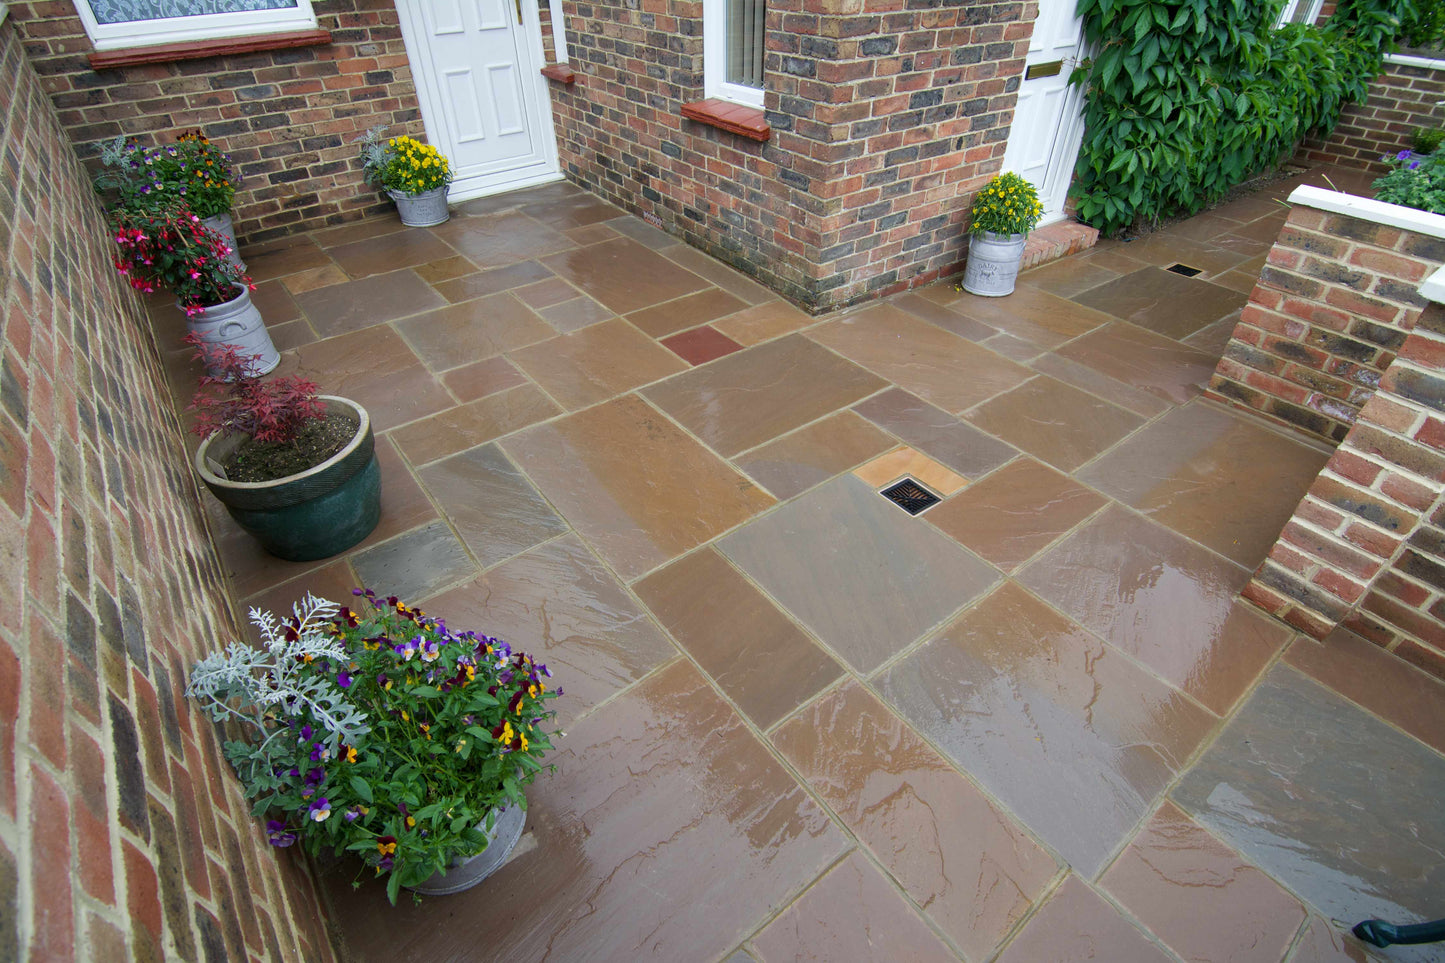 Autumn Brown Indian Sandstone Paving (900x600mm, 18.6m² Single Size Pack 22mm Calibrated Sawn Edge)